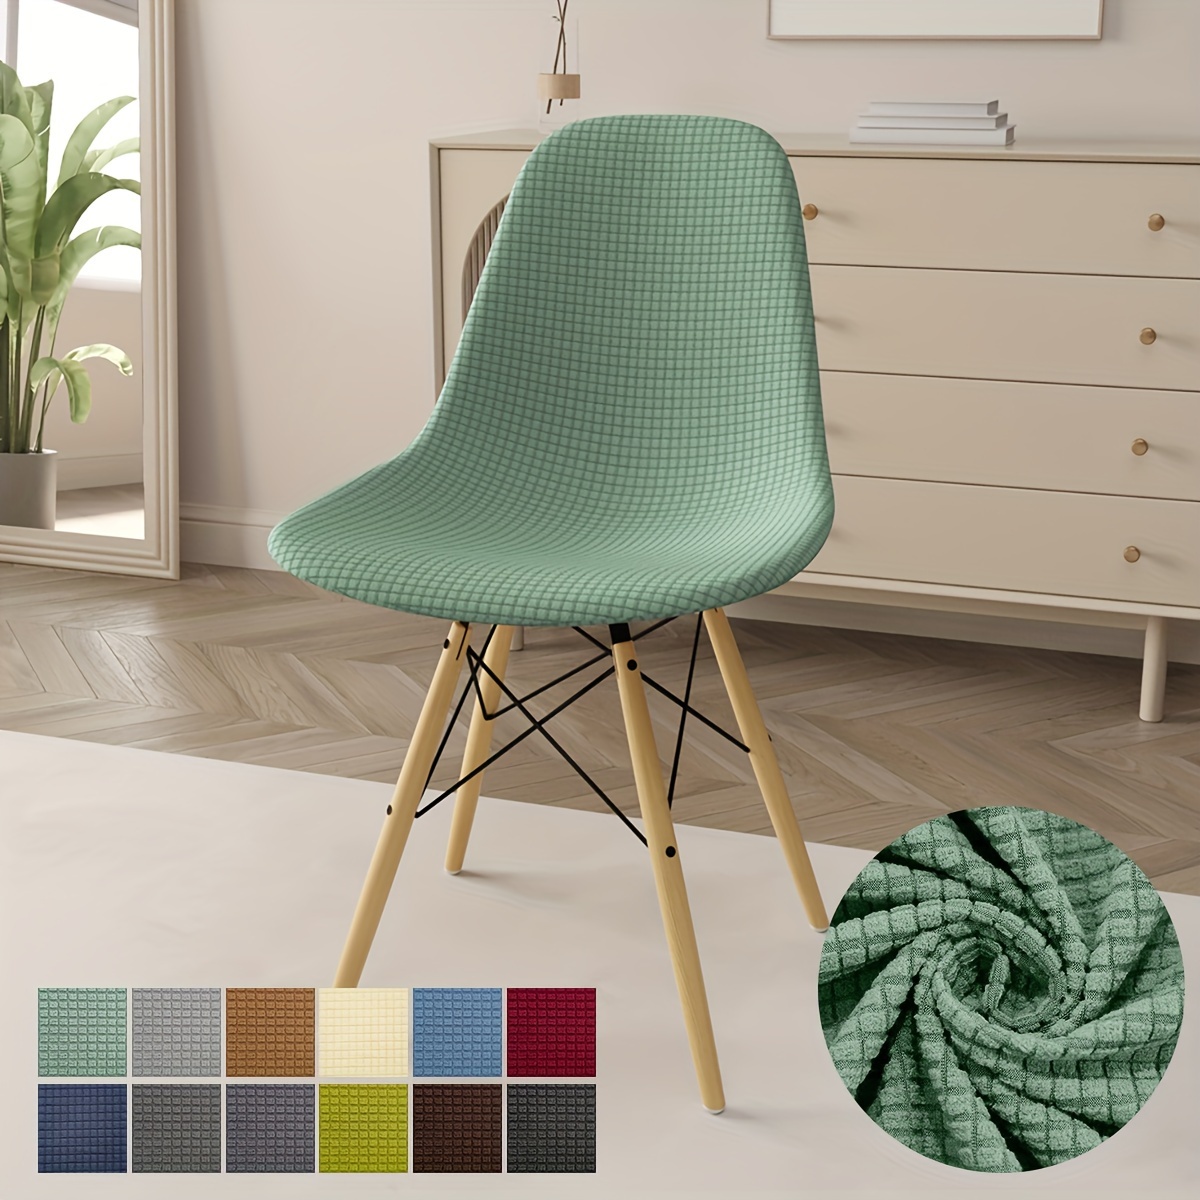 

Classic Elastic Chair Slipcovers Polyester Spandex Blend, Machine Washable Stretch Dining Room Chair Covers With Slip-resistant Grip Closure